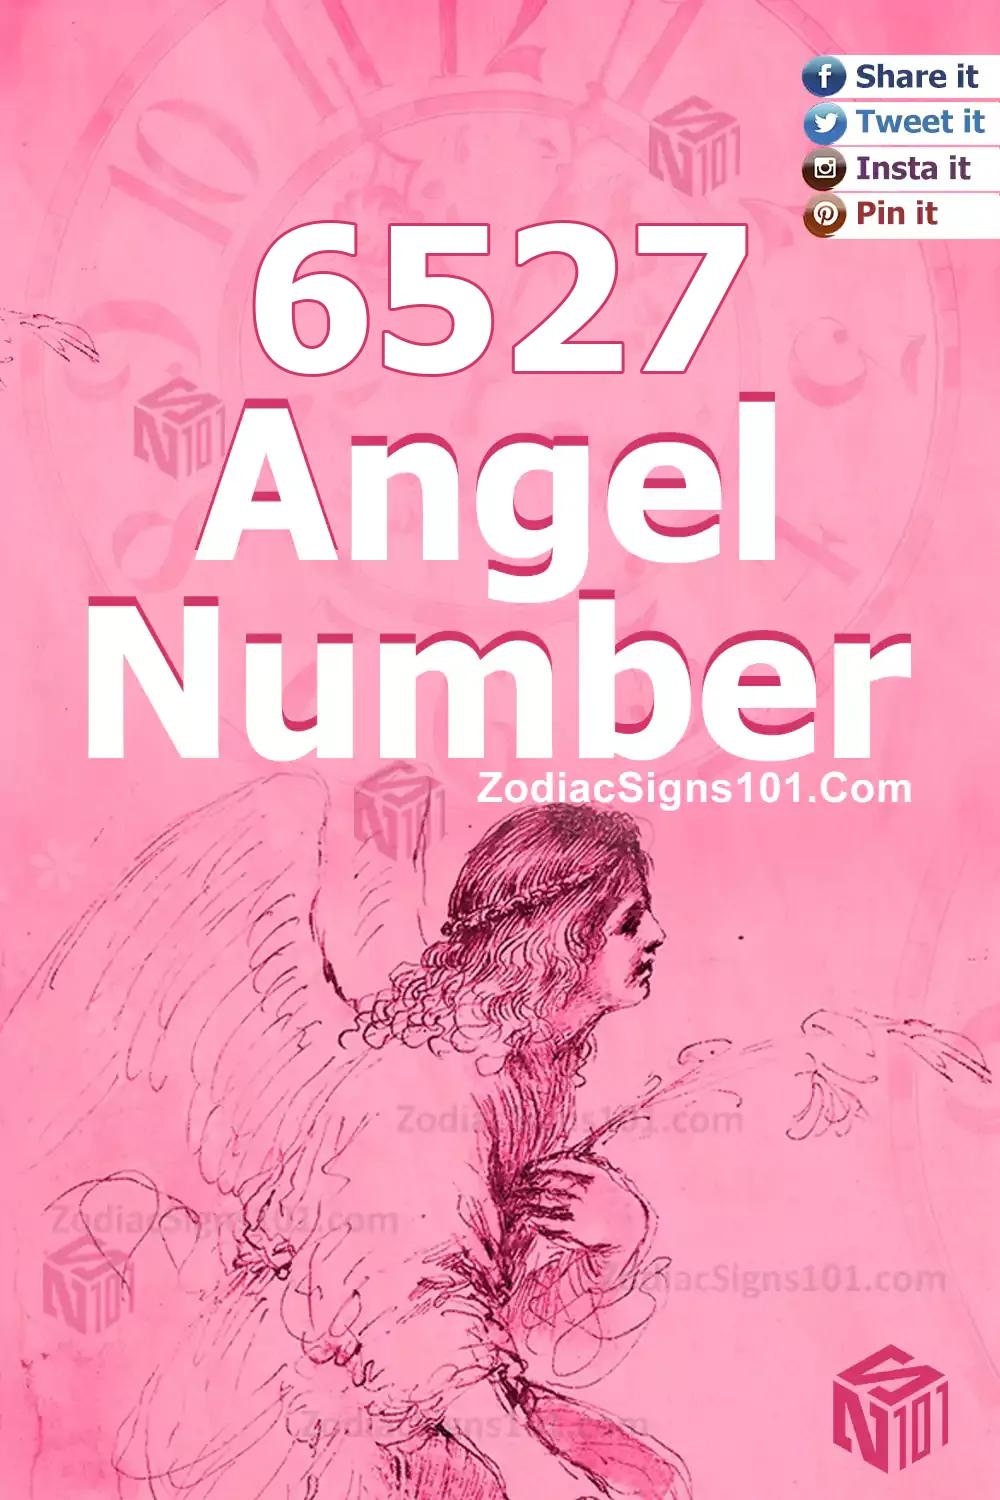 6527 Angel Number Meaning